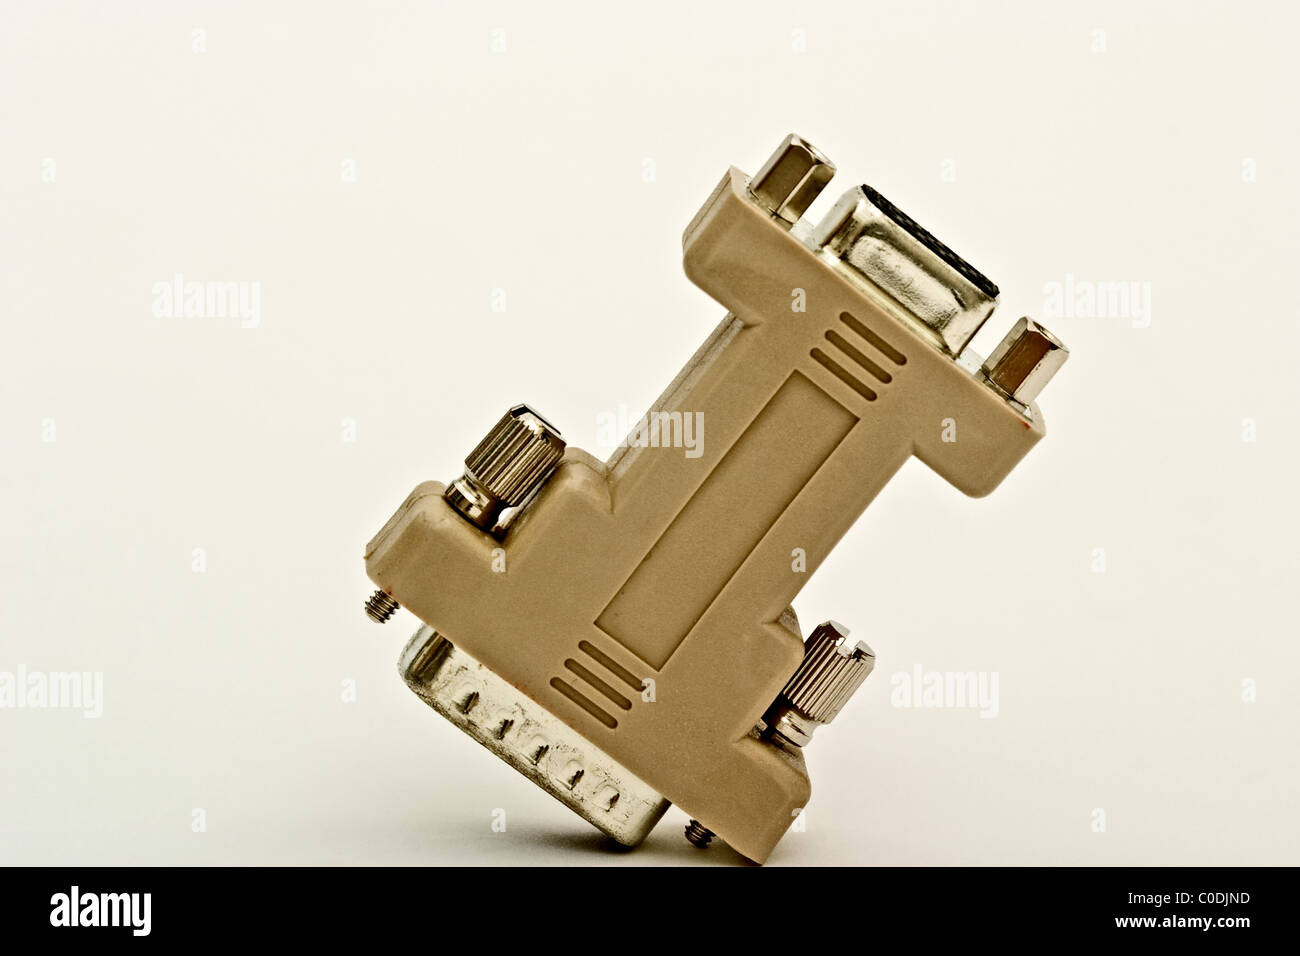 24 pin to 9 pin connector Stock Photo